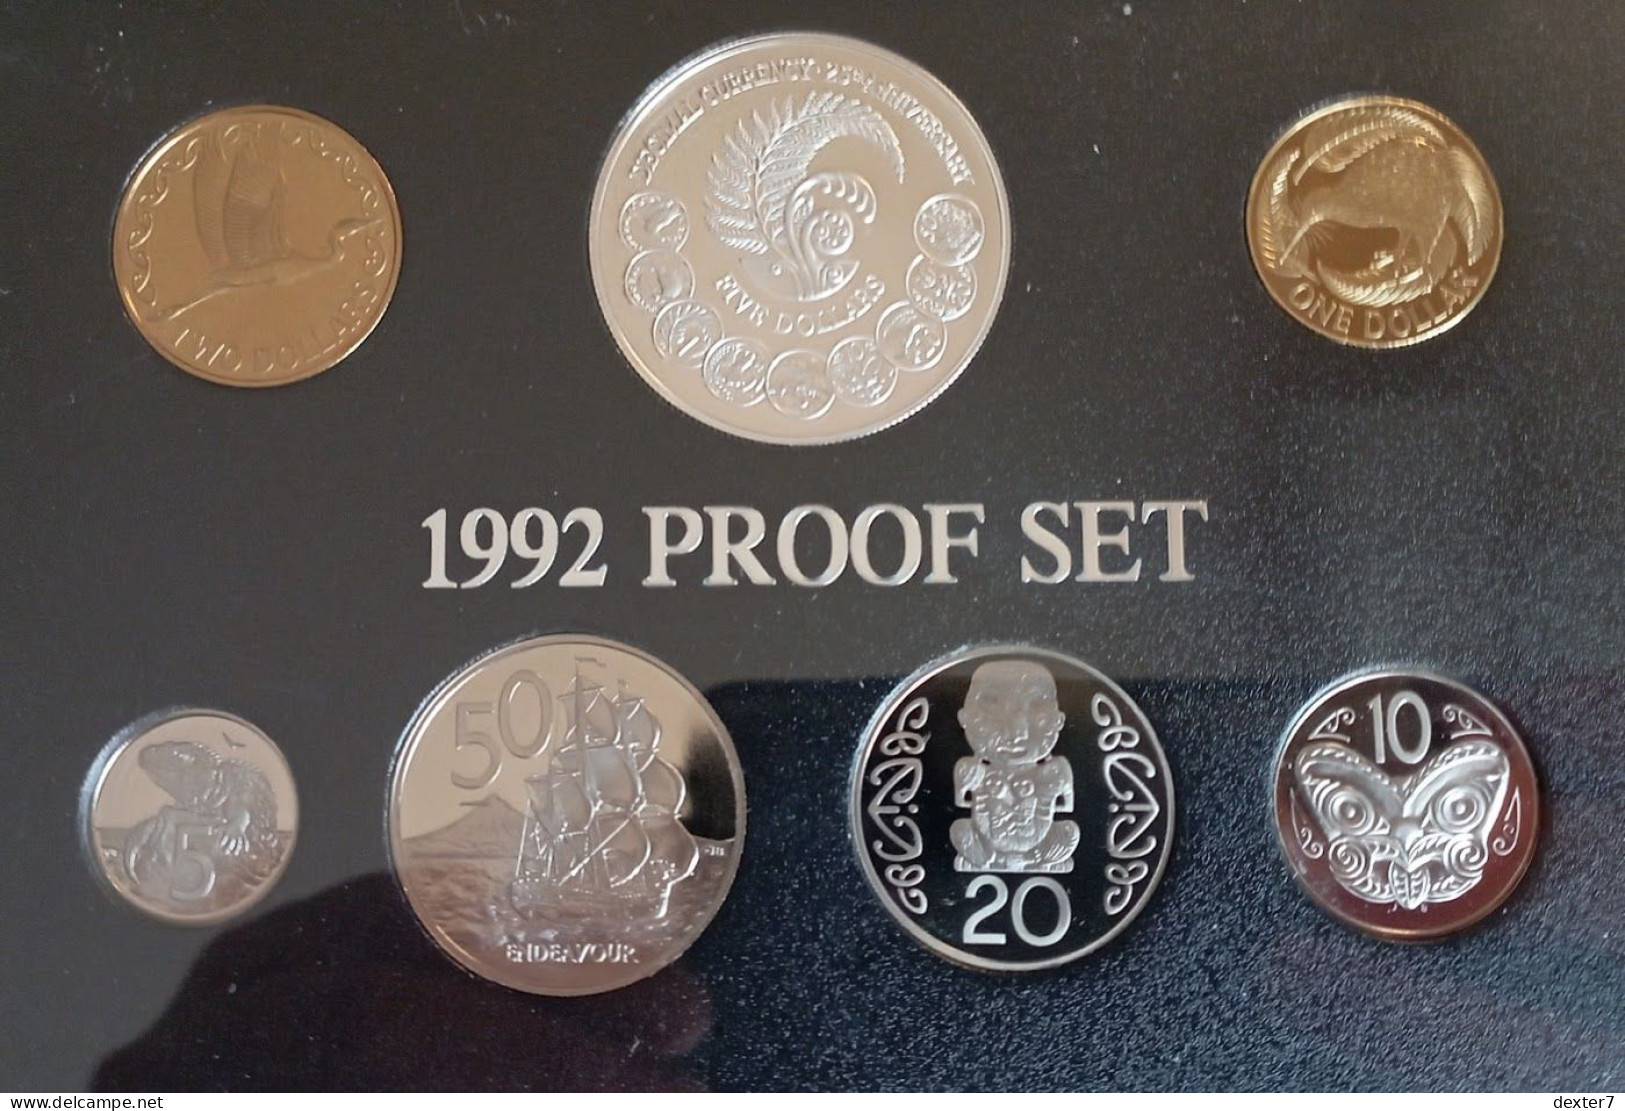 New Zealand Proof Set With Silver 5 Dollars Elizabeth II 1992 25 Years Of Decimal Currency - New Zealand